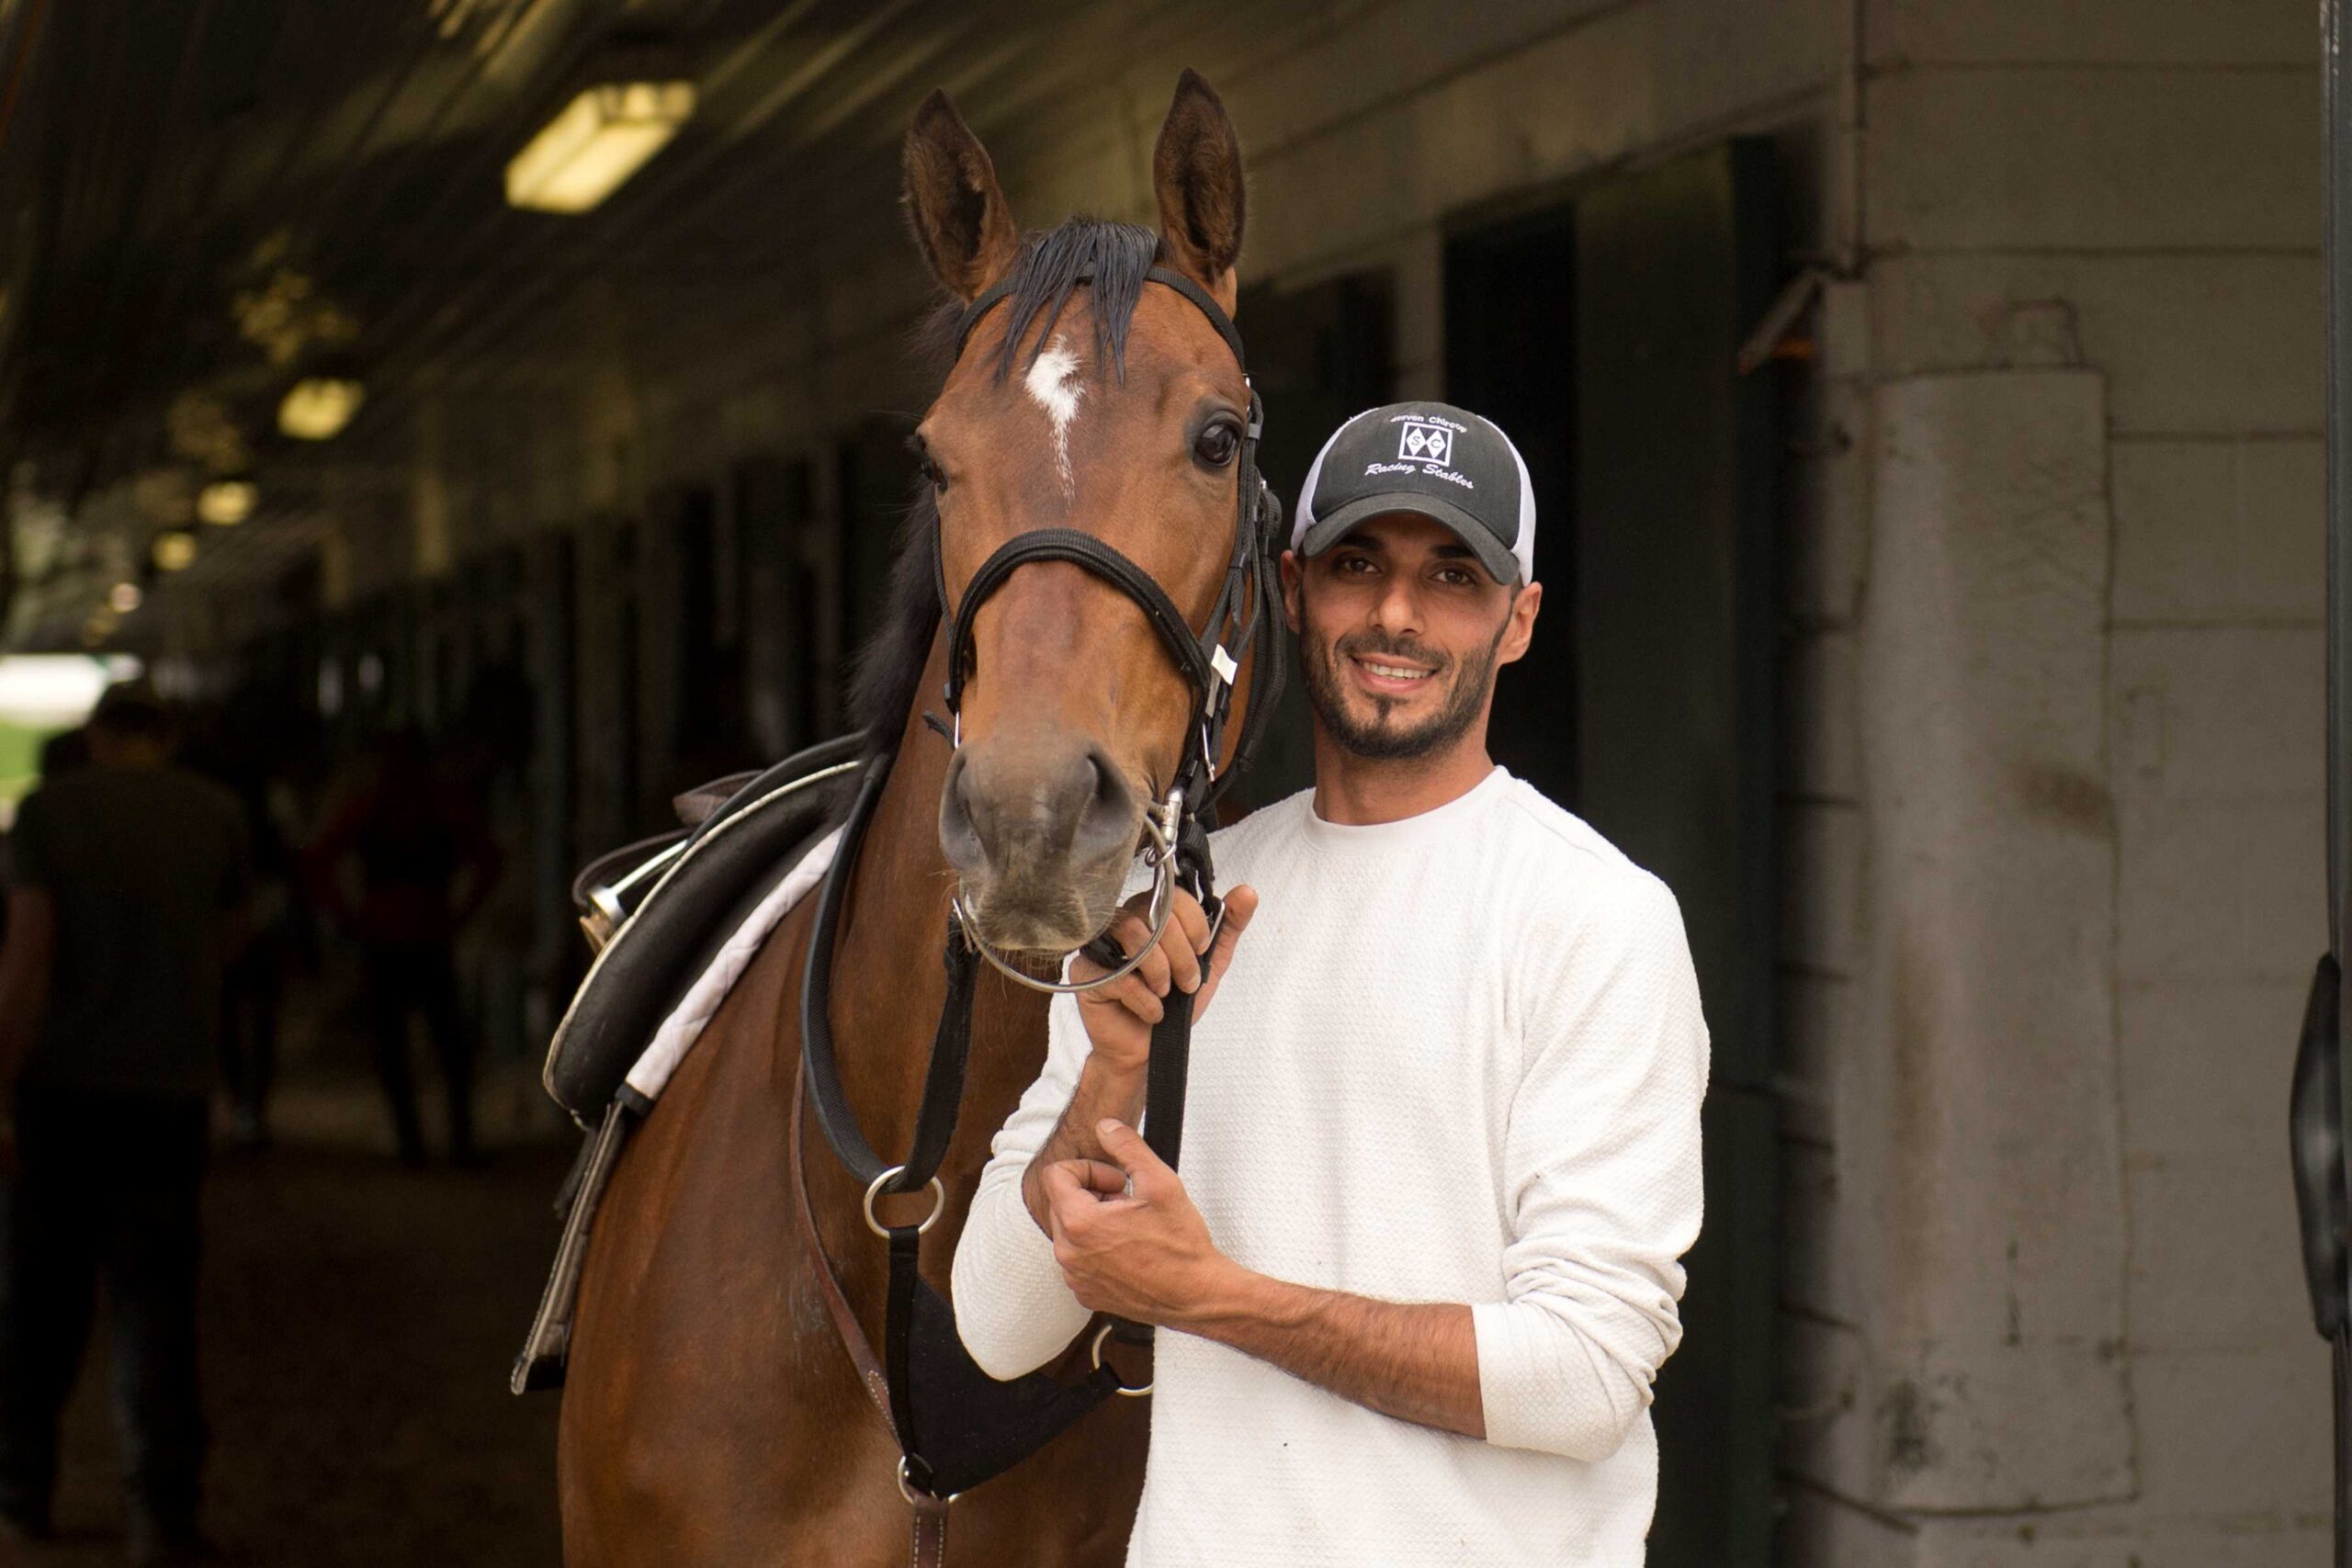 Horse Person of the Month for May presented by New Holland: Chad Sabra